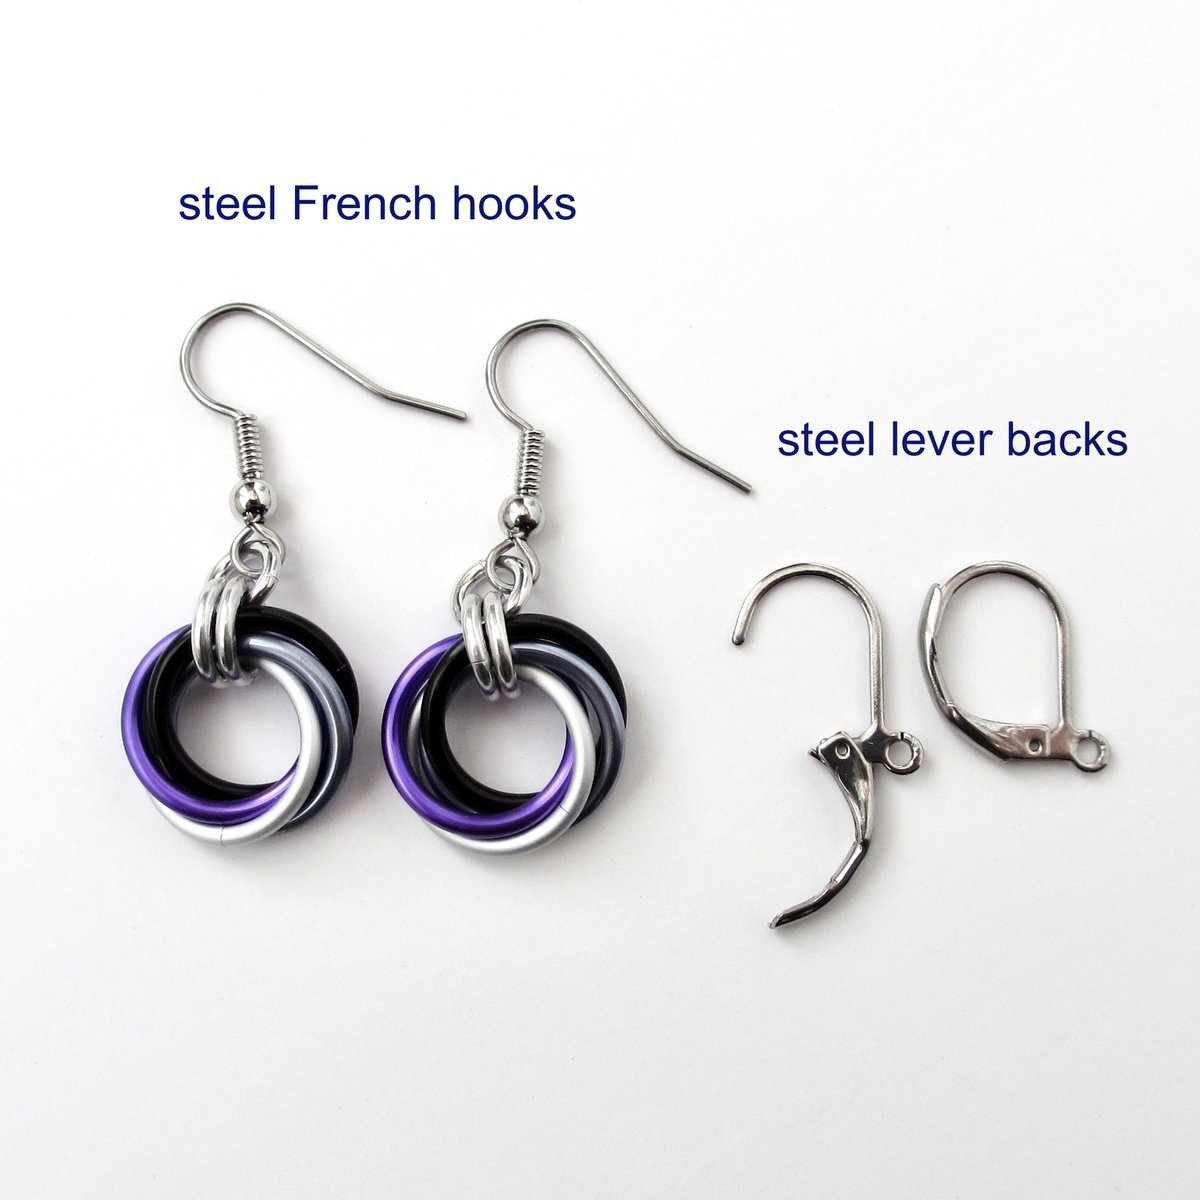 Asexual pride earrings, ace pride jewelry, chainmail love knot earrings; black gray white purple